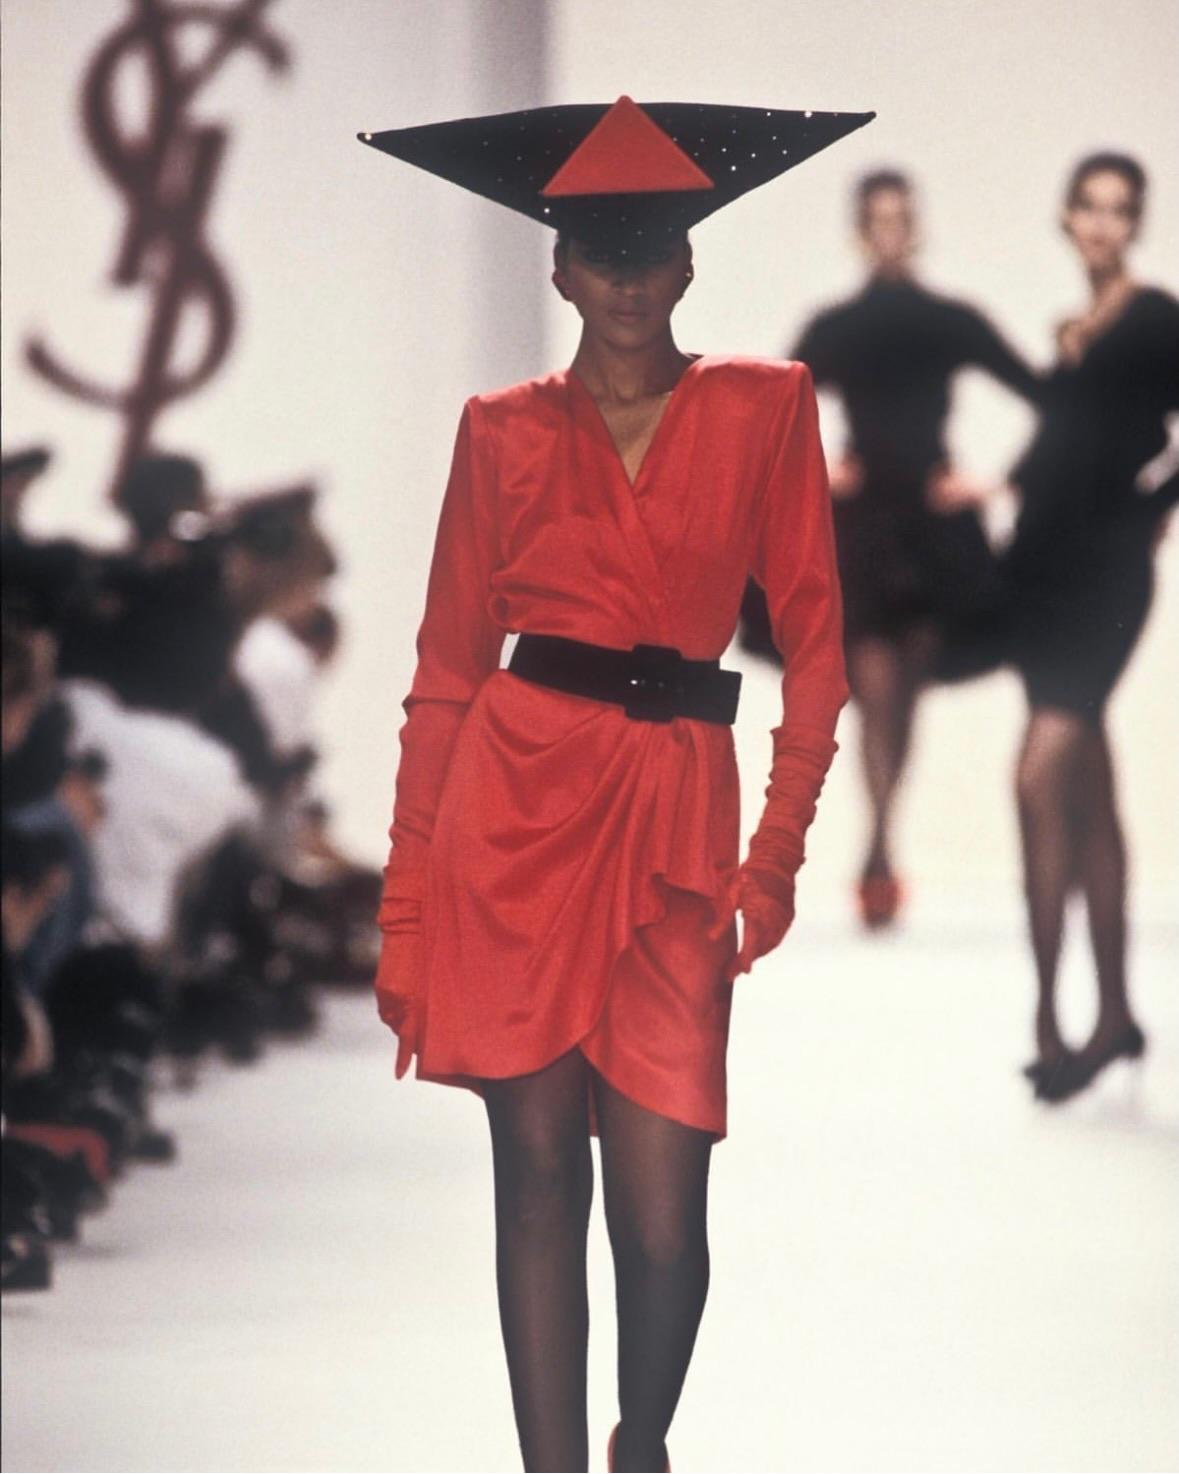 - Saint Laurent Rive Gauche Cocktail Dress
- Yves Saint Laurent era 
- From the Autumn/Winter 1988 runway collection (shown in 
  red colourway)
- Gorgeous weighty satin
- Mini length
- Fully lined
- Long sleeved with zips at wrists
- Beautiful